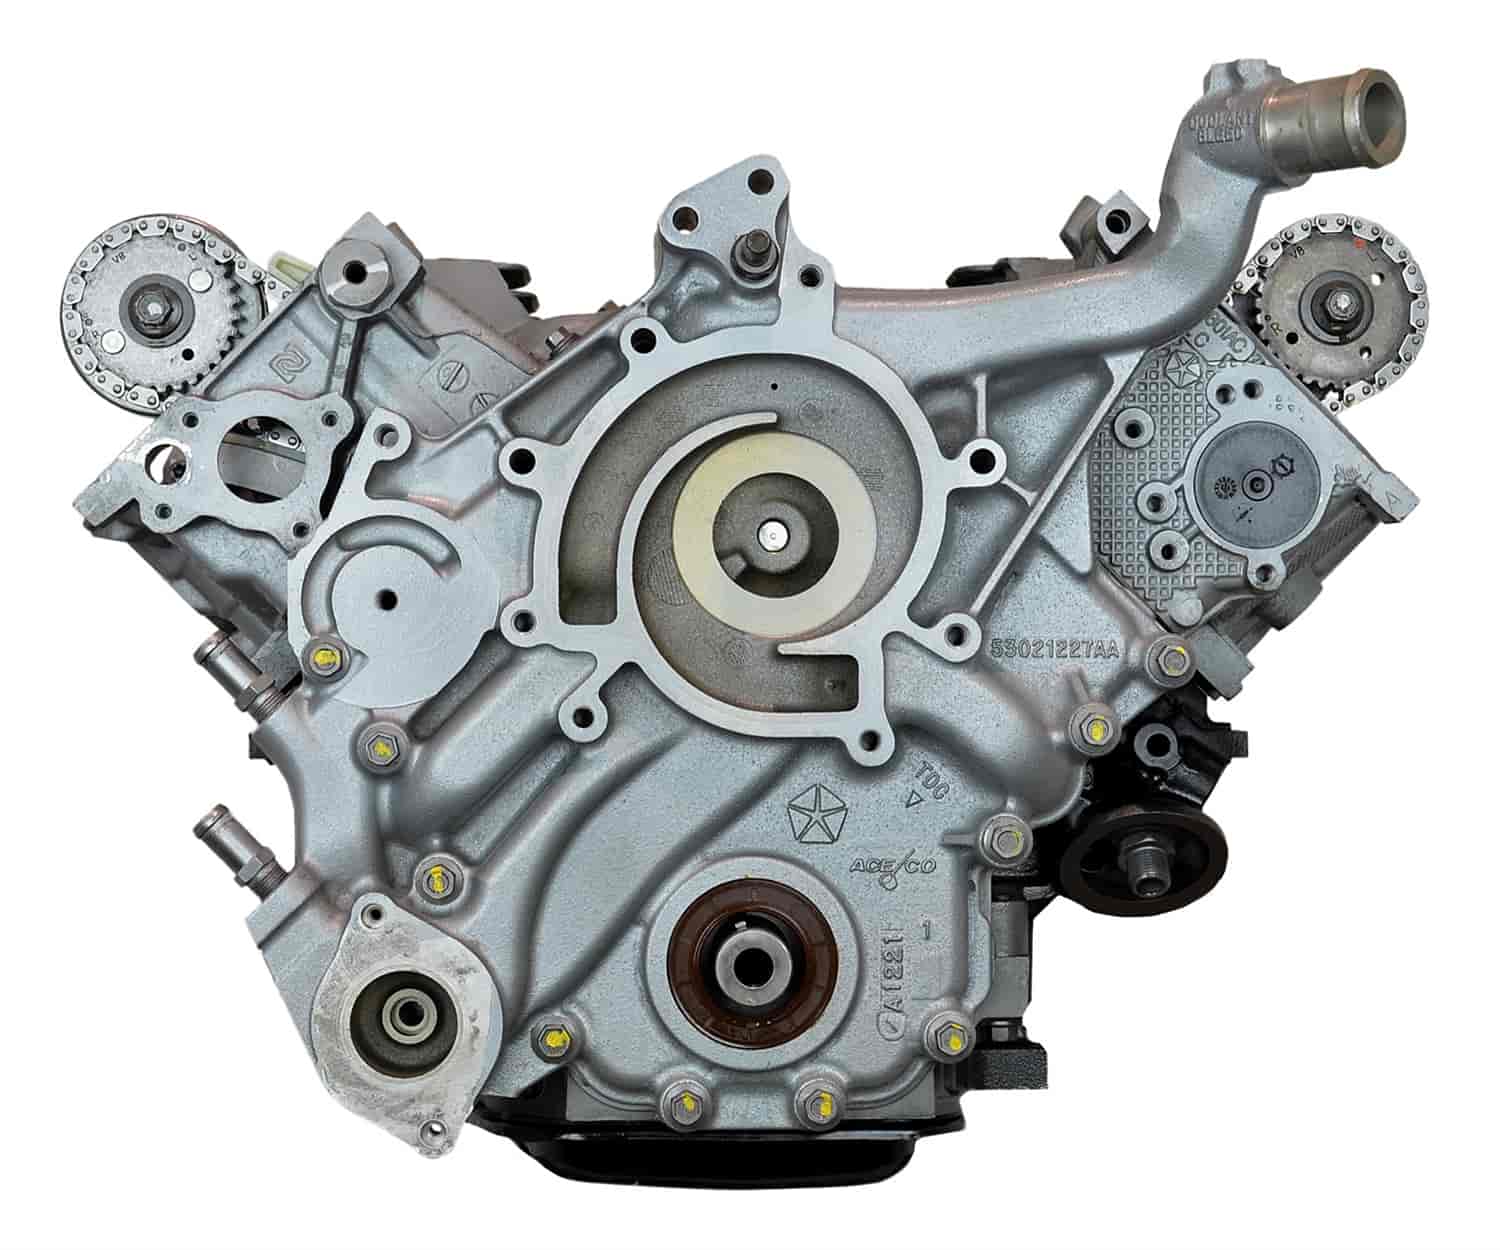 Remanufactured Crate Engine for 1999-2004 Dodge/Jeep with 4.7L V8